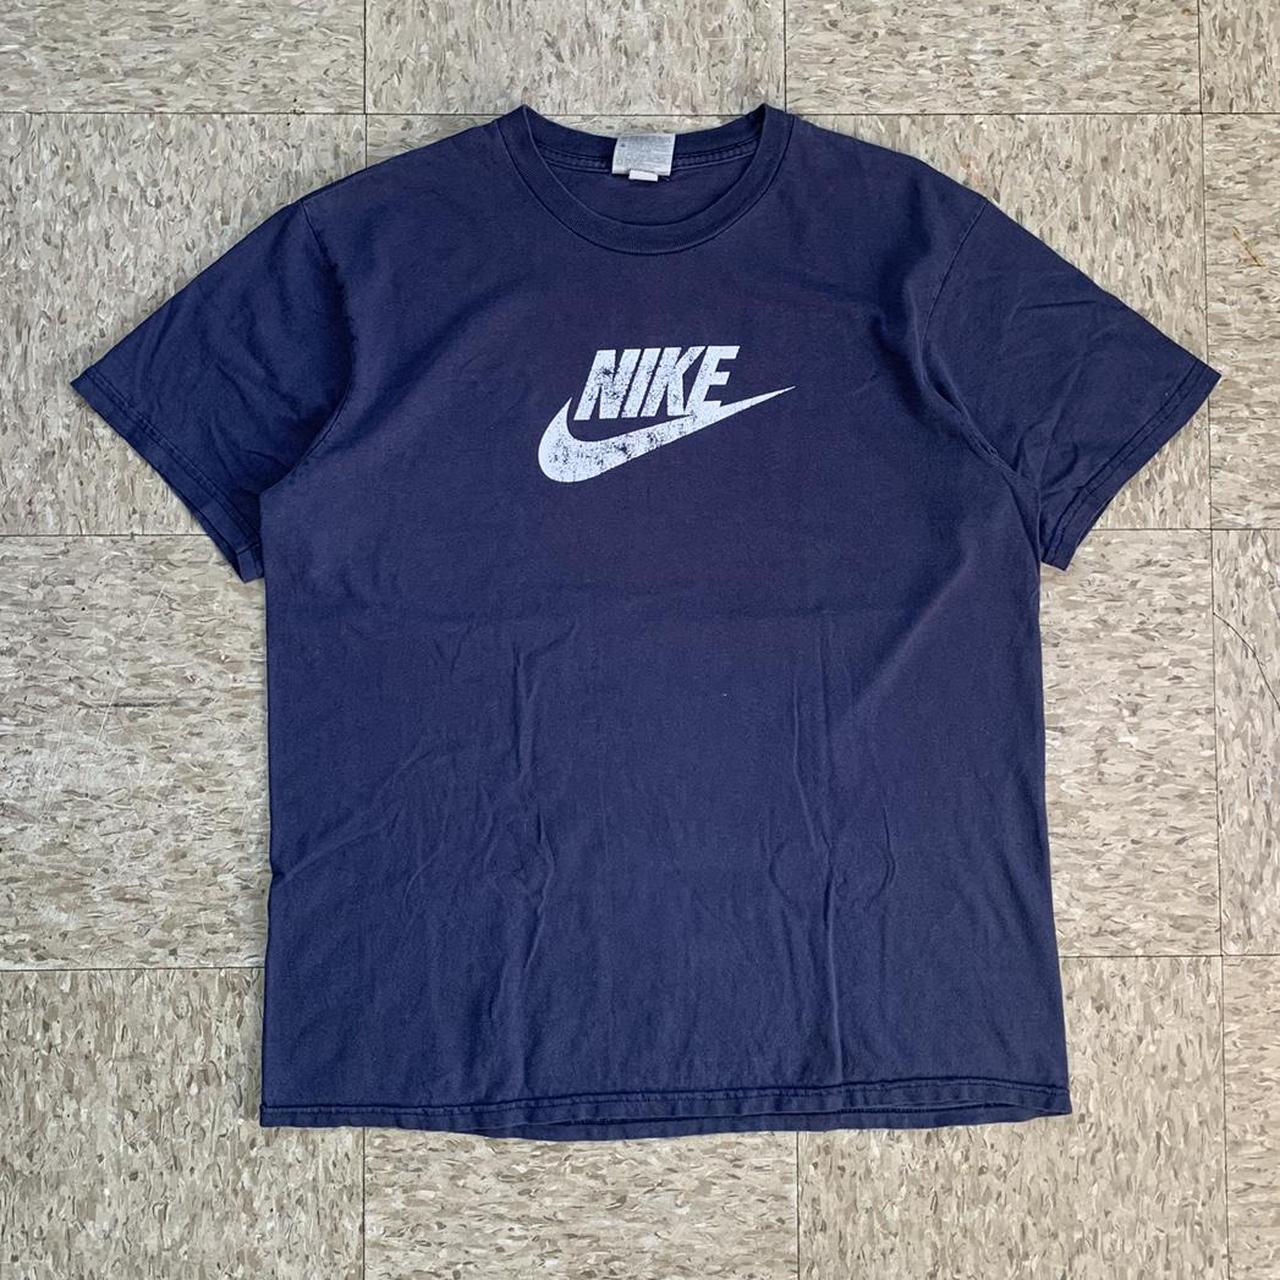 Vintage 2000s Nike Spellout T-shirt Made in... - Depop